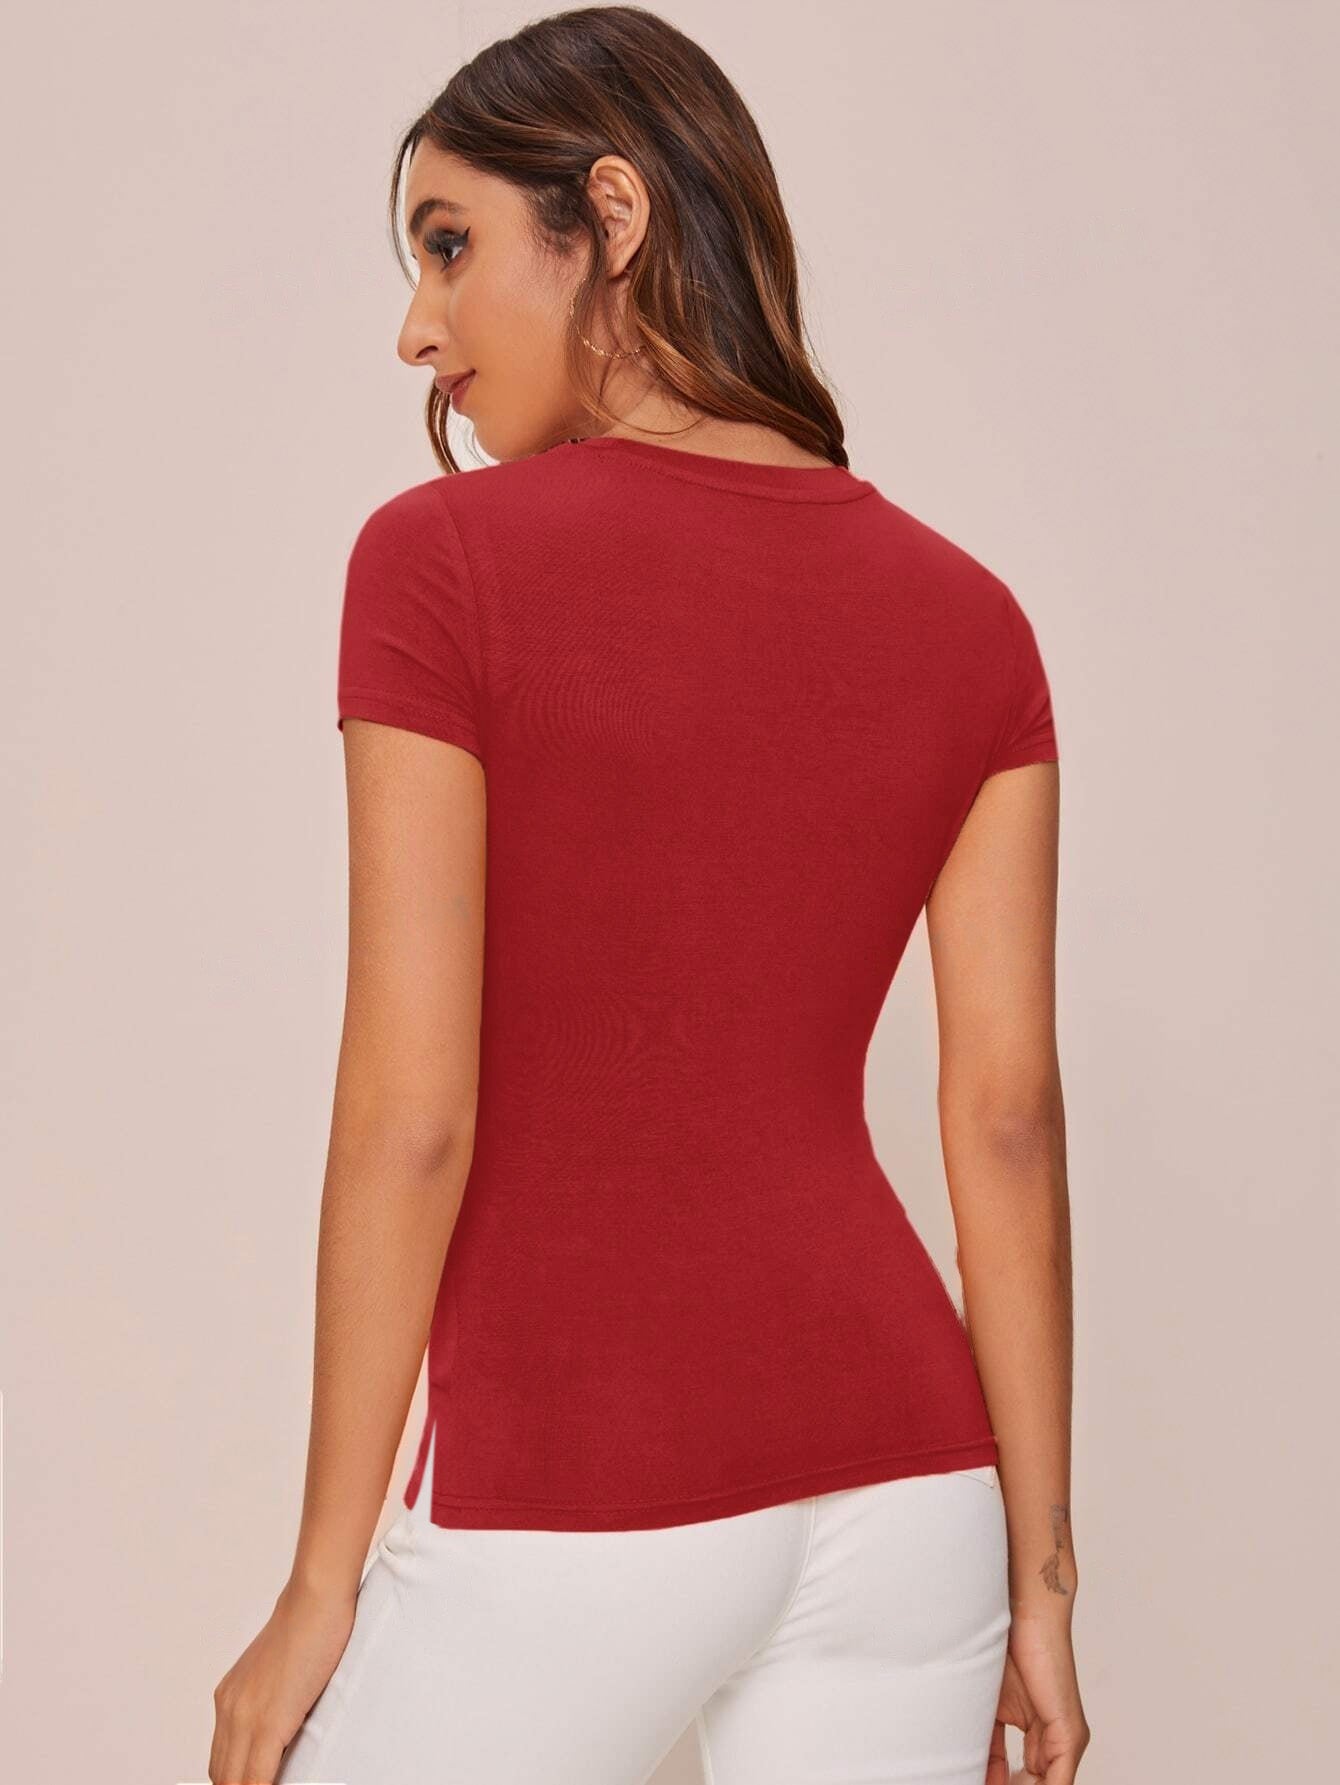 ChecnOne Crew Neck T Shirt For Women-Coral Red-BE1442